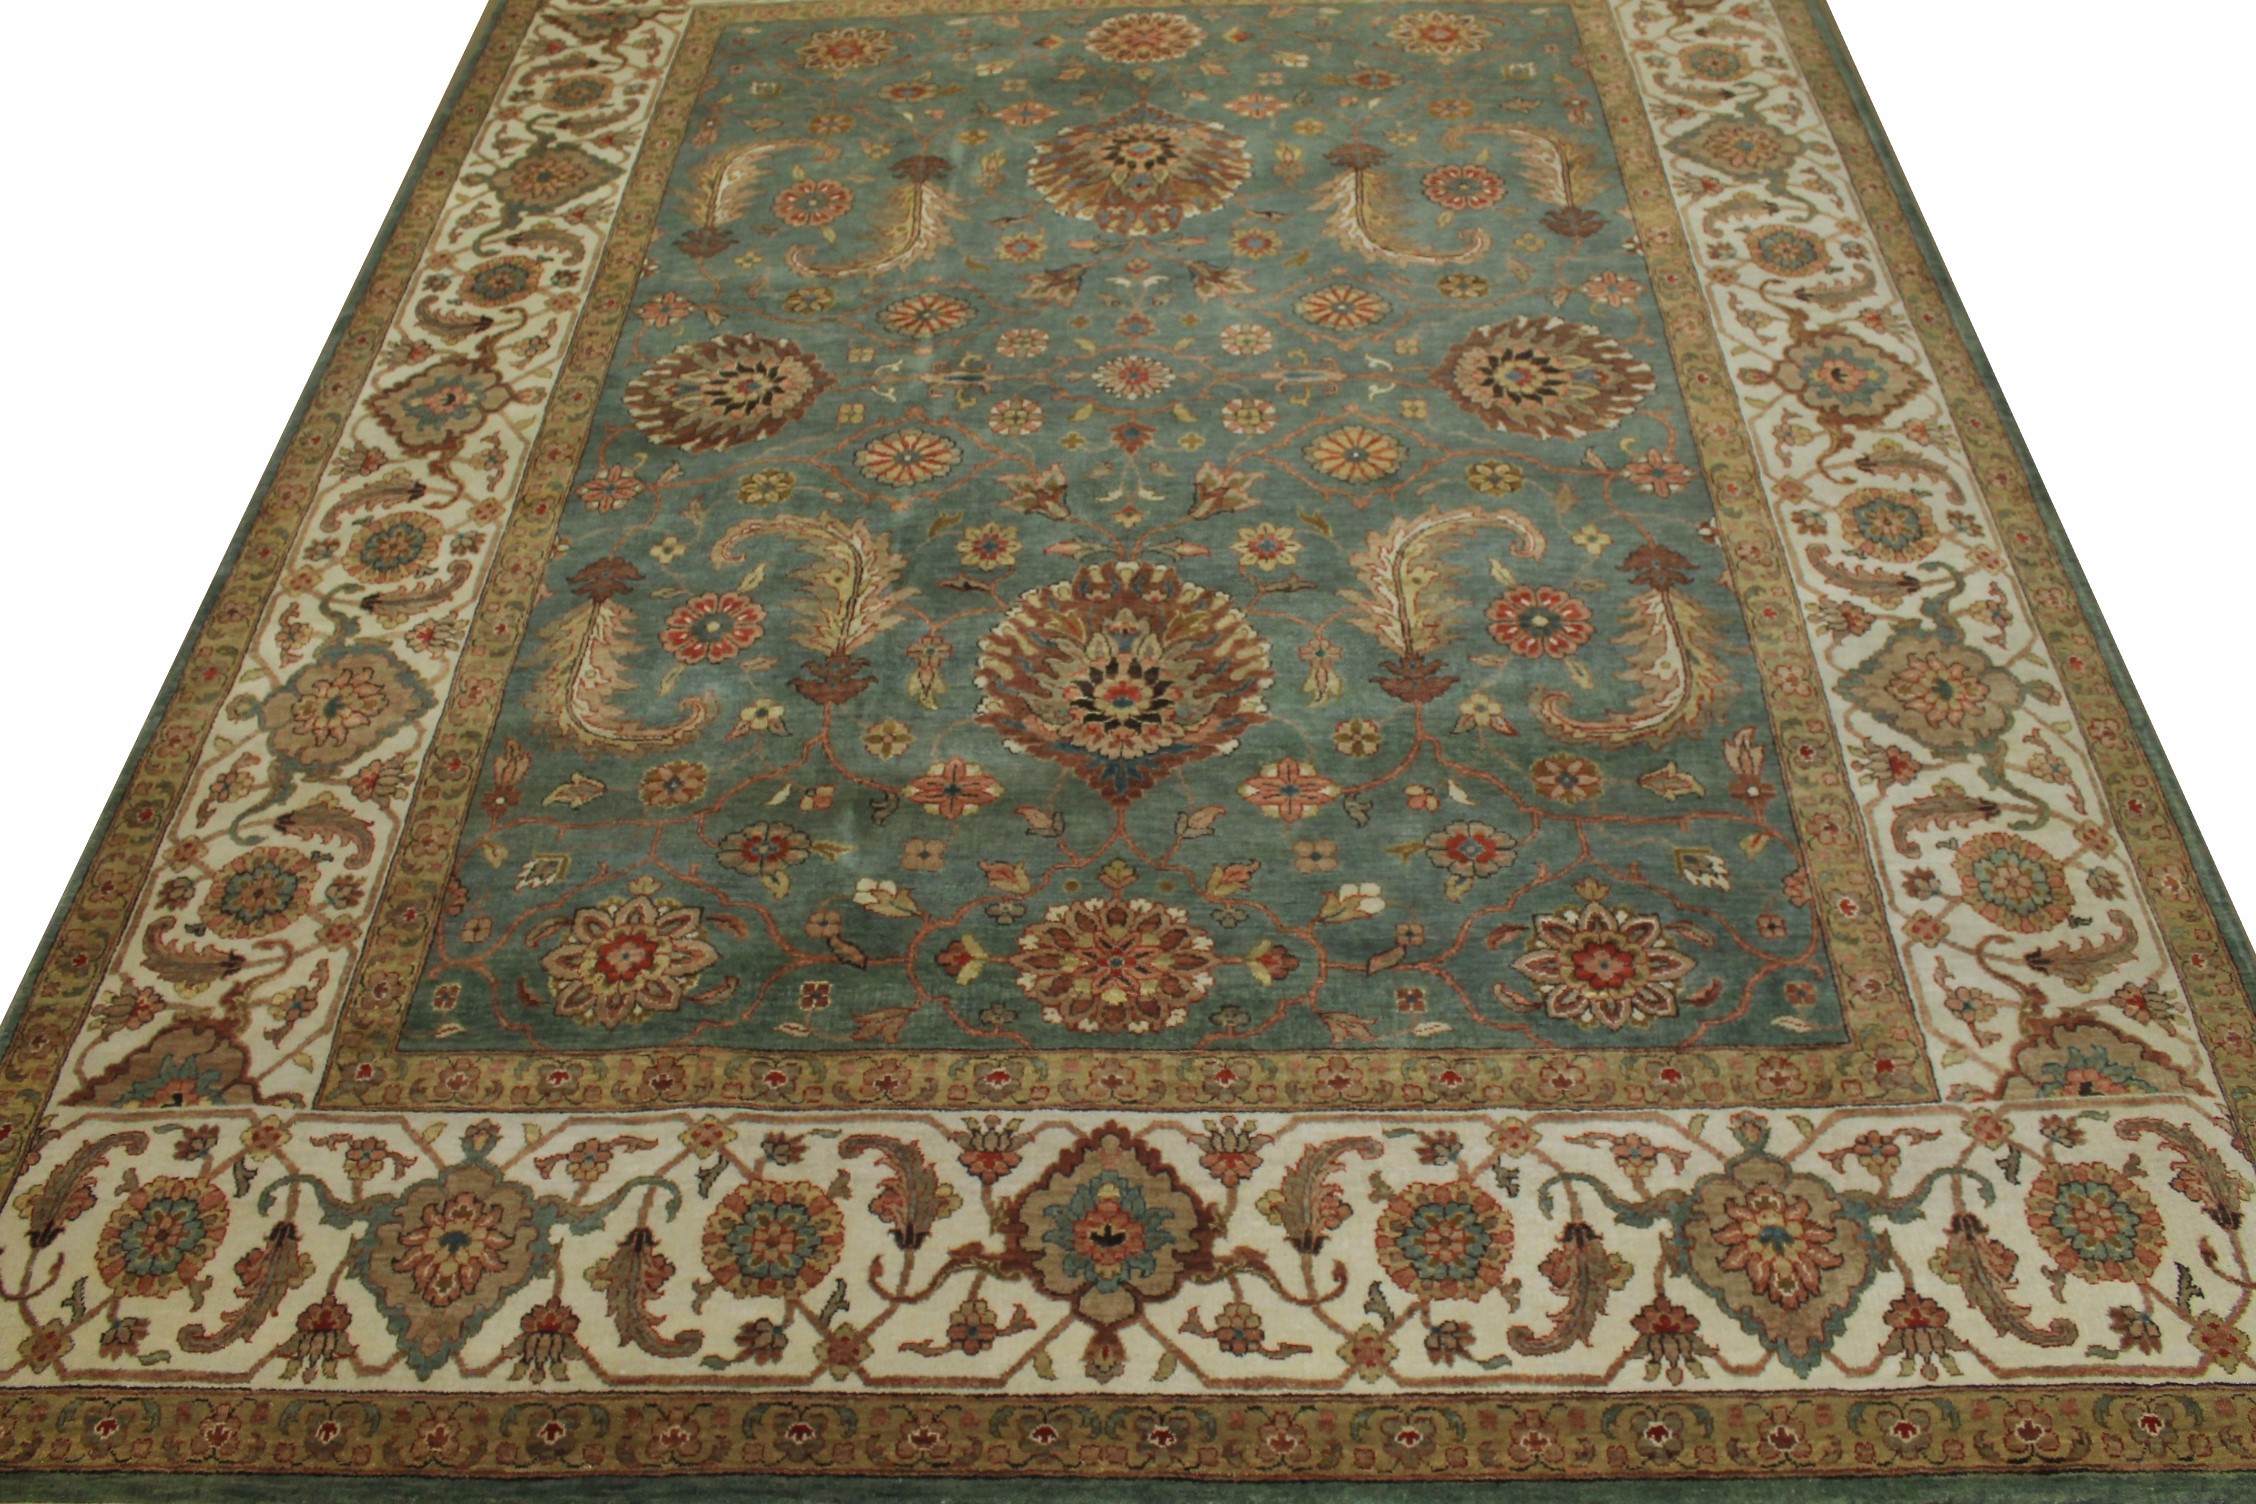 8x10 Antique Revival Hand Knotted Wool Area Rug - MR19913